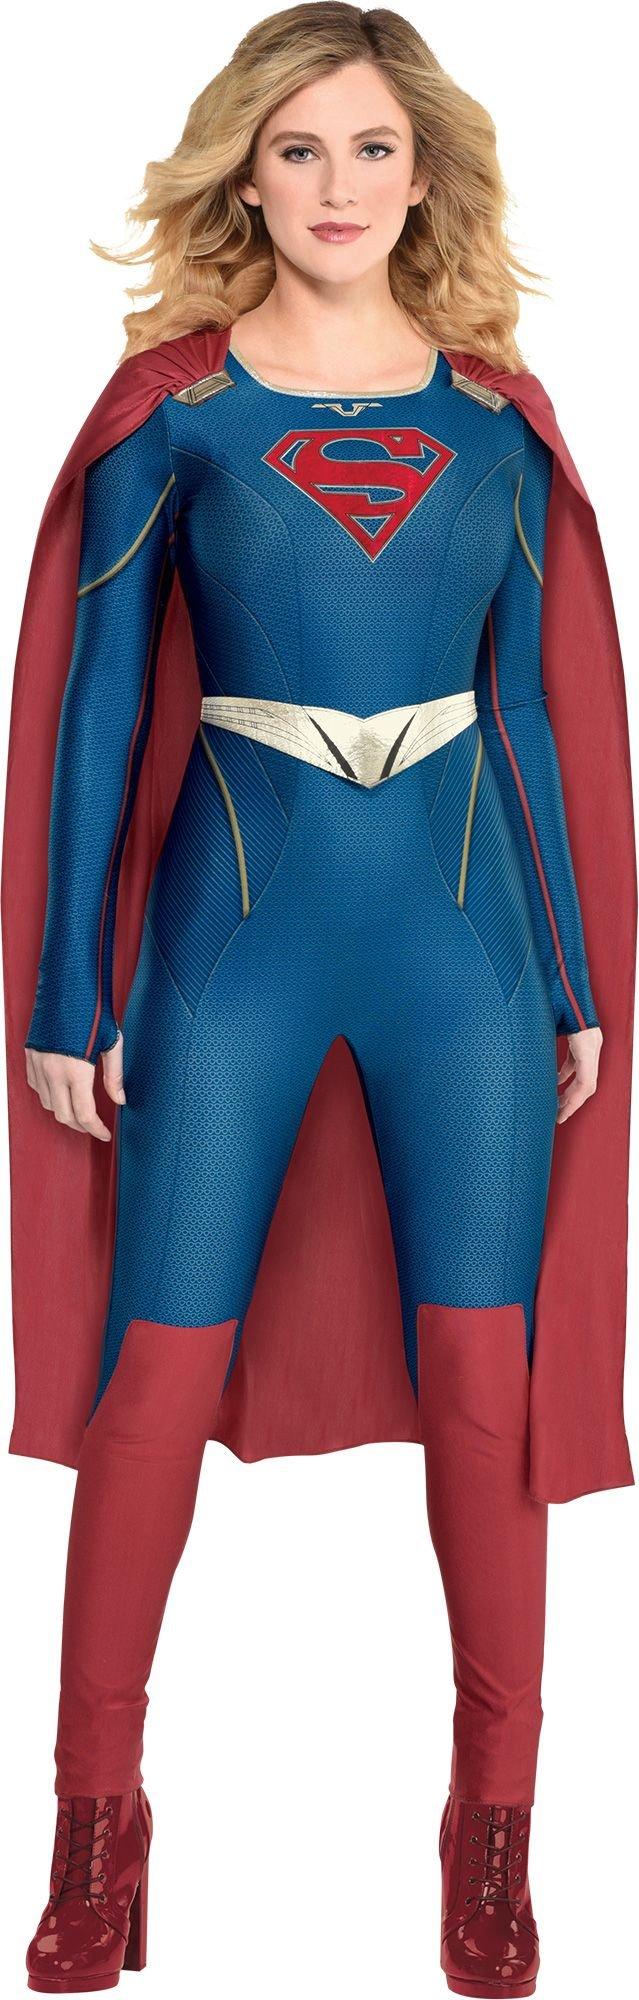 Supergirl Costume For Adults Party City 